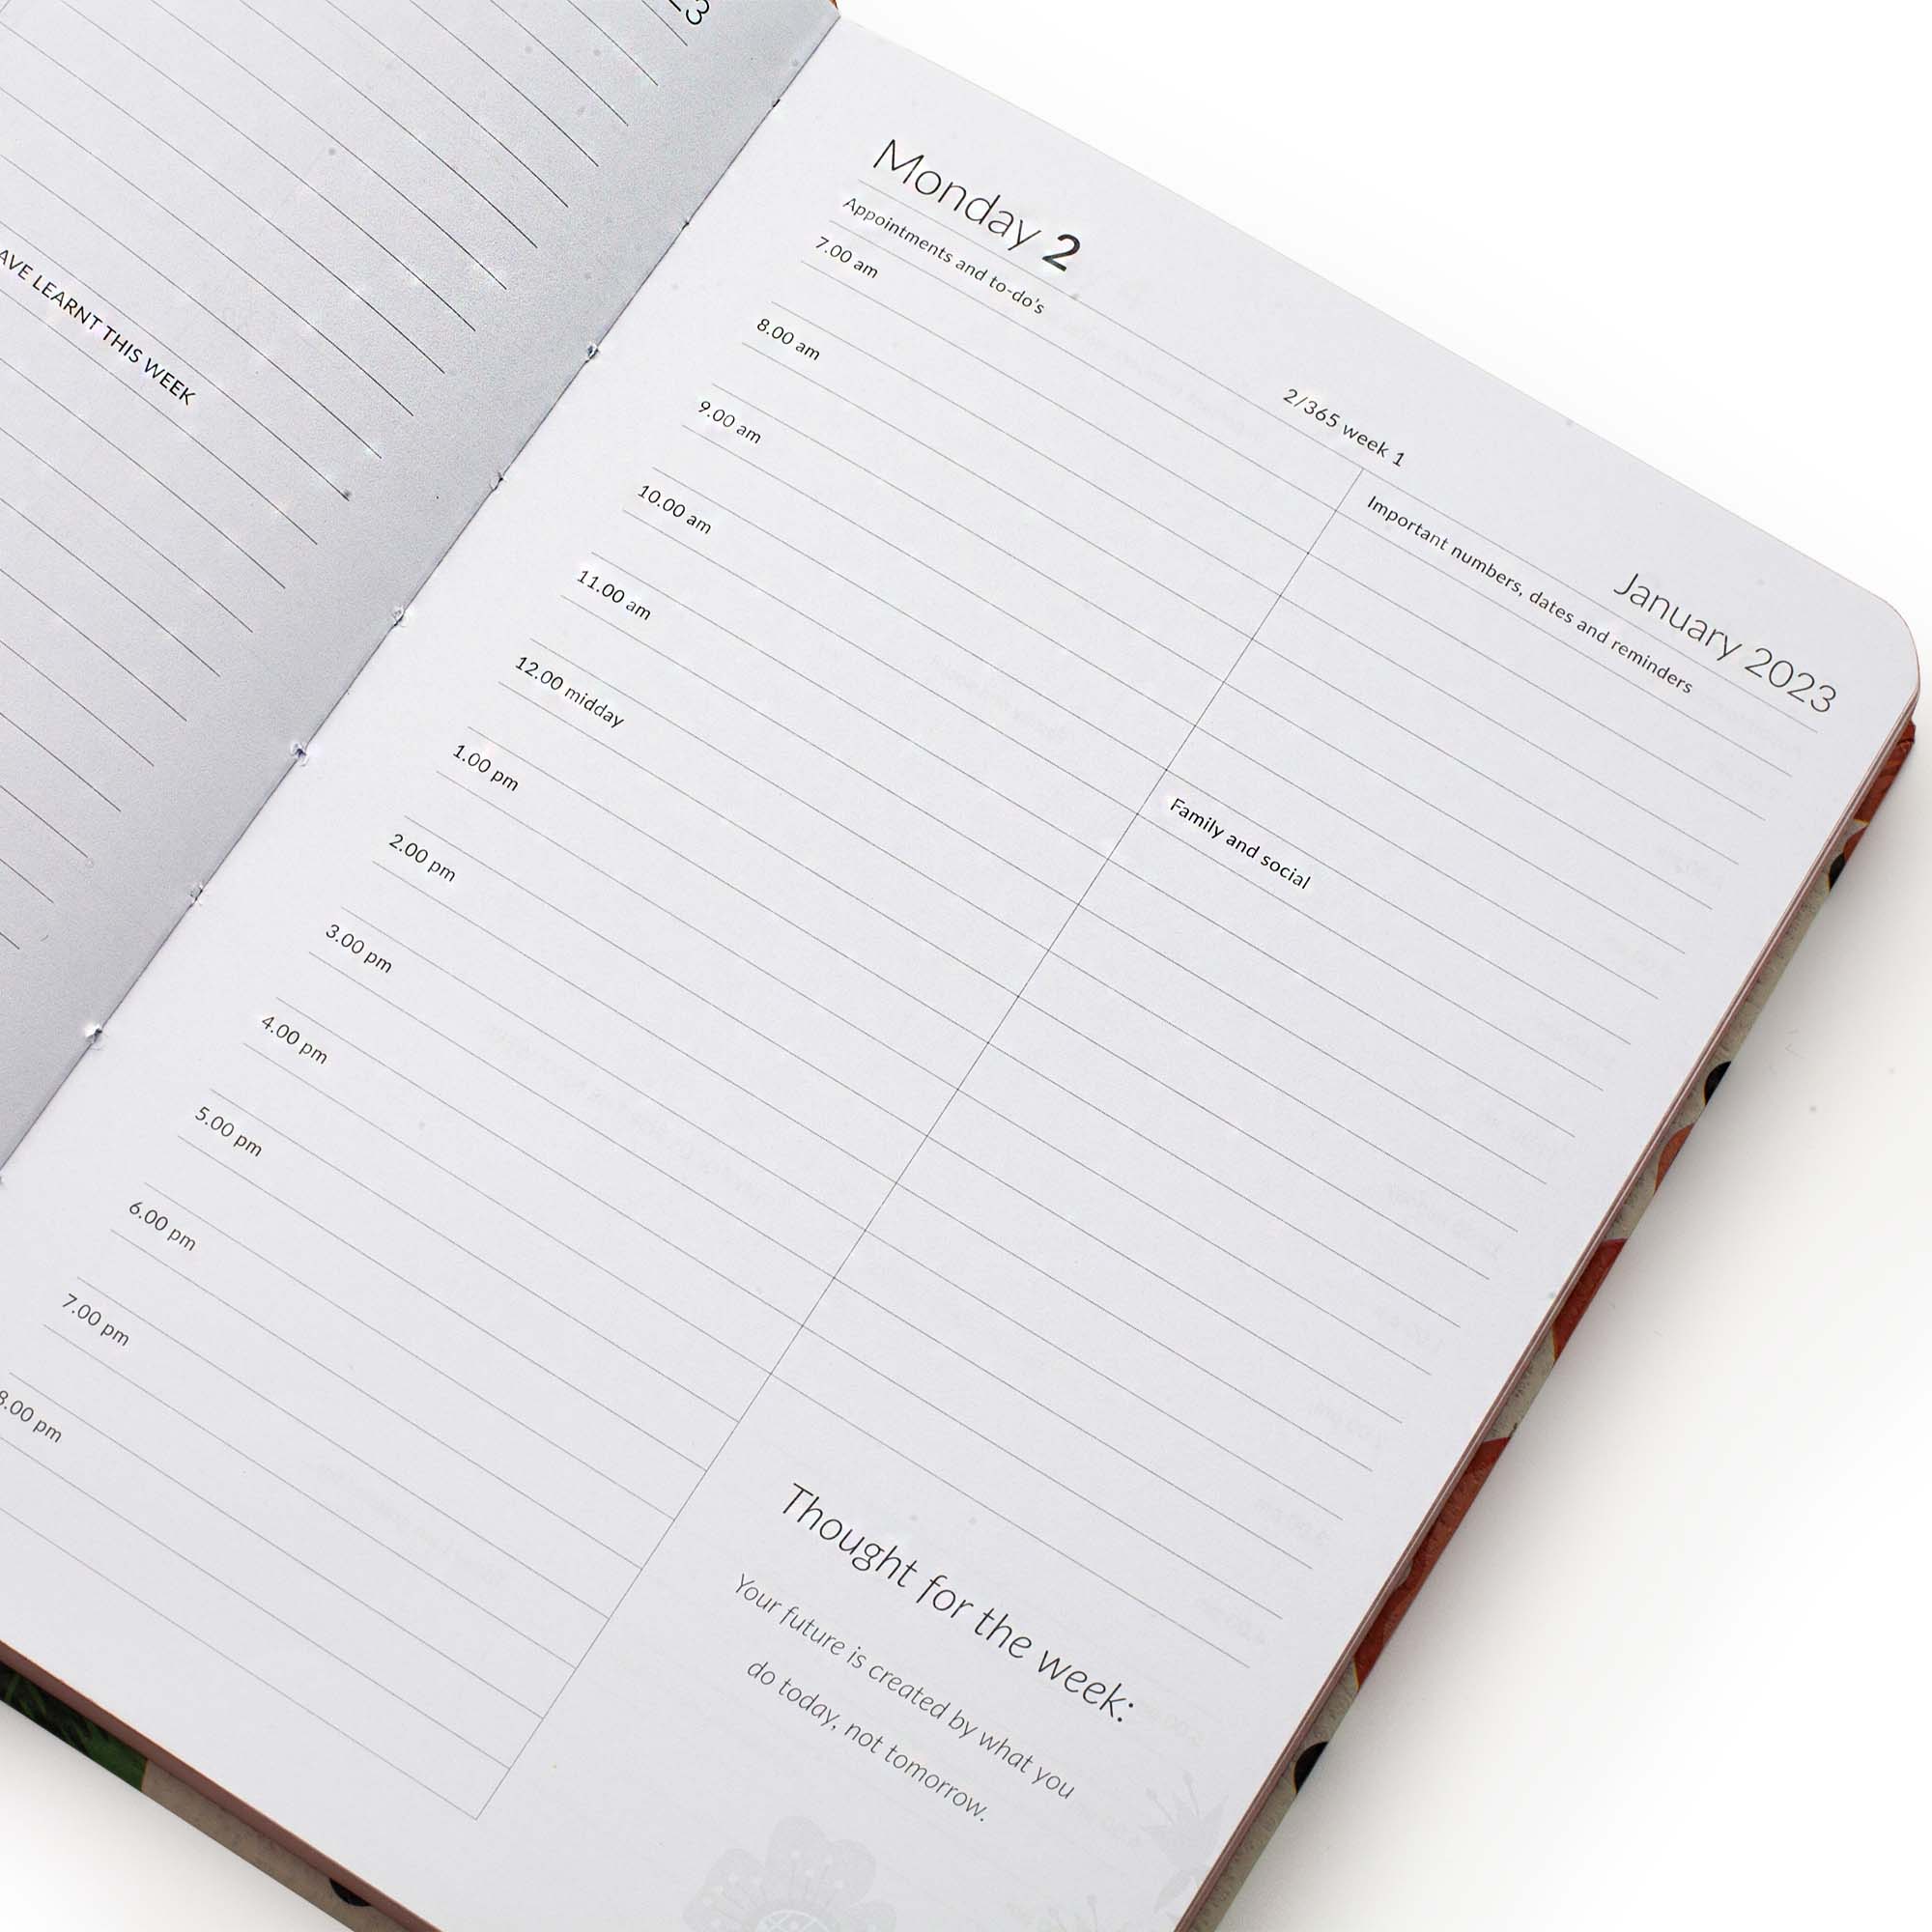 Image shows a Monday page of the MOM/WOW 2023 diary